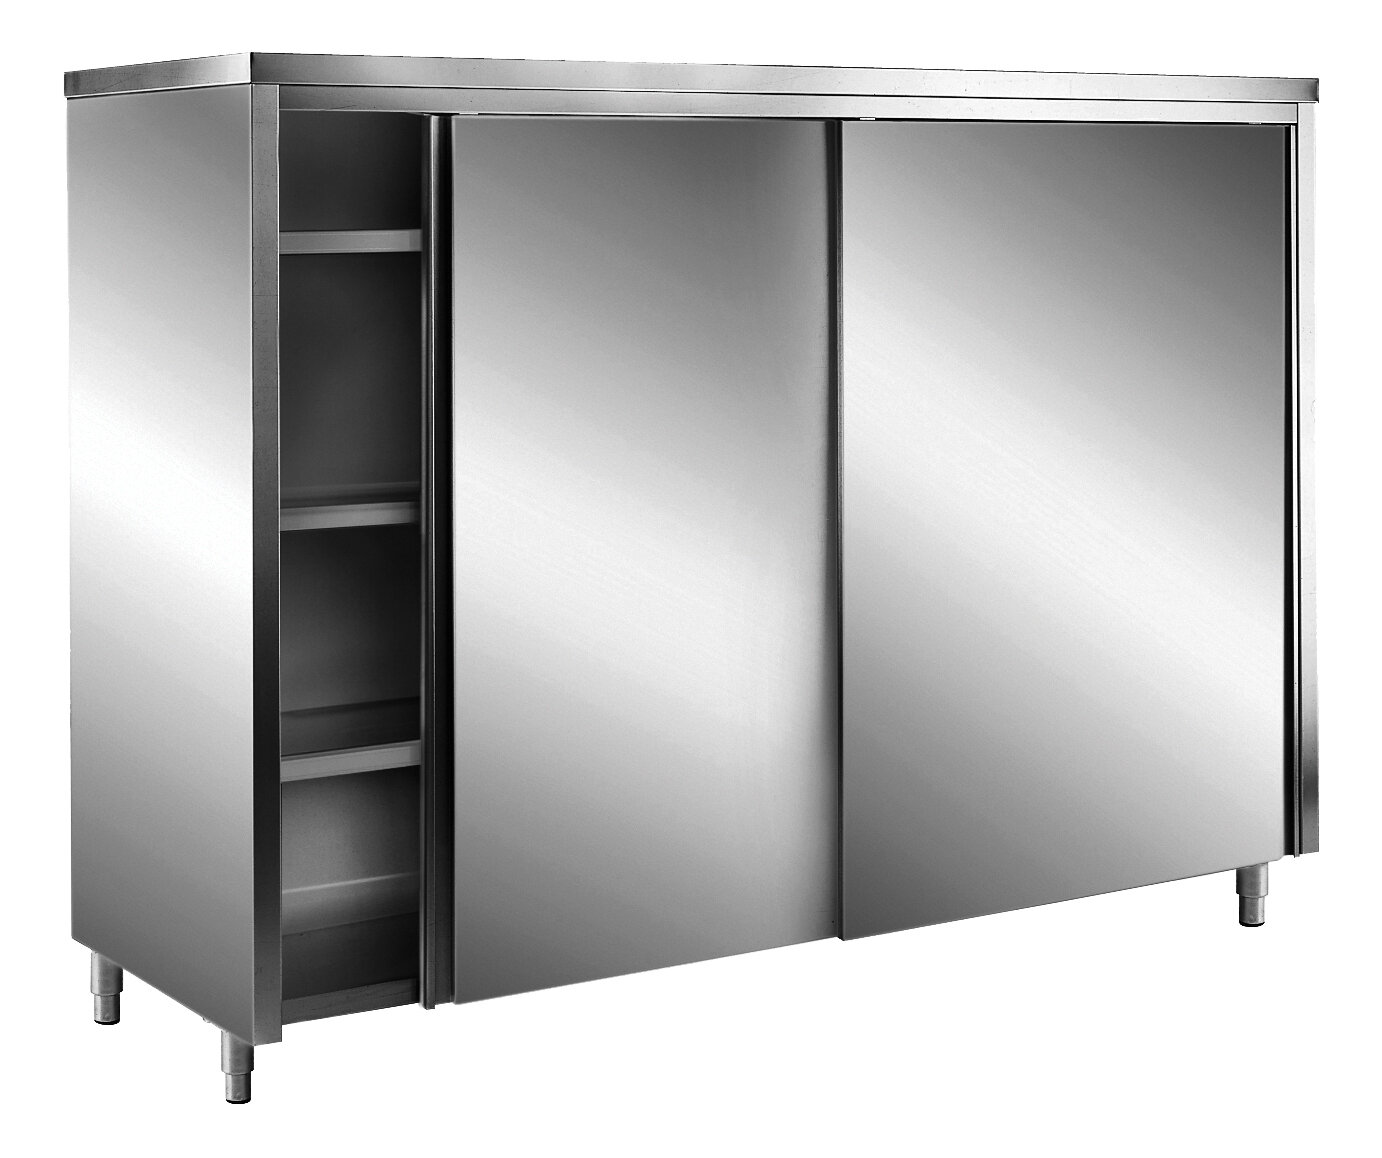 SARO Stainless steel storage cabinets with sliding doors AISI 304, flat roof, 1800x700